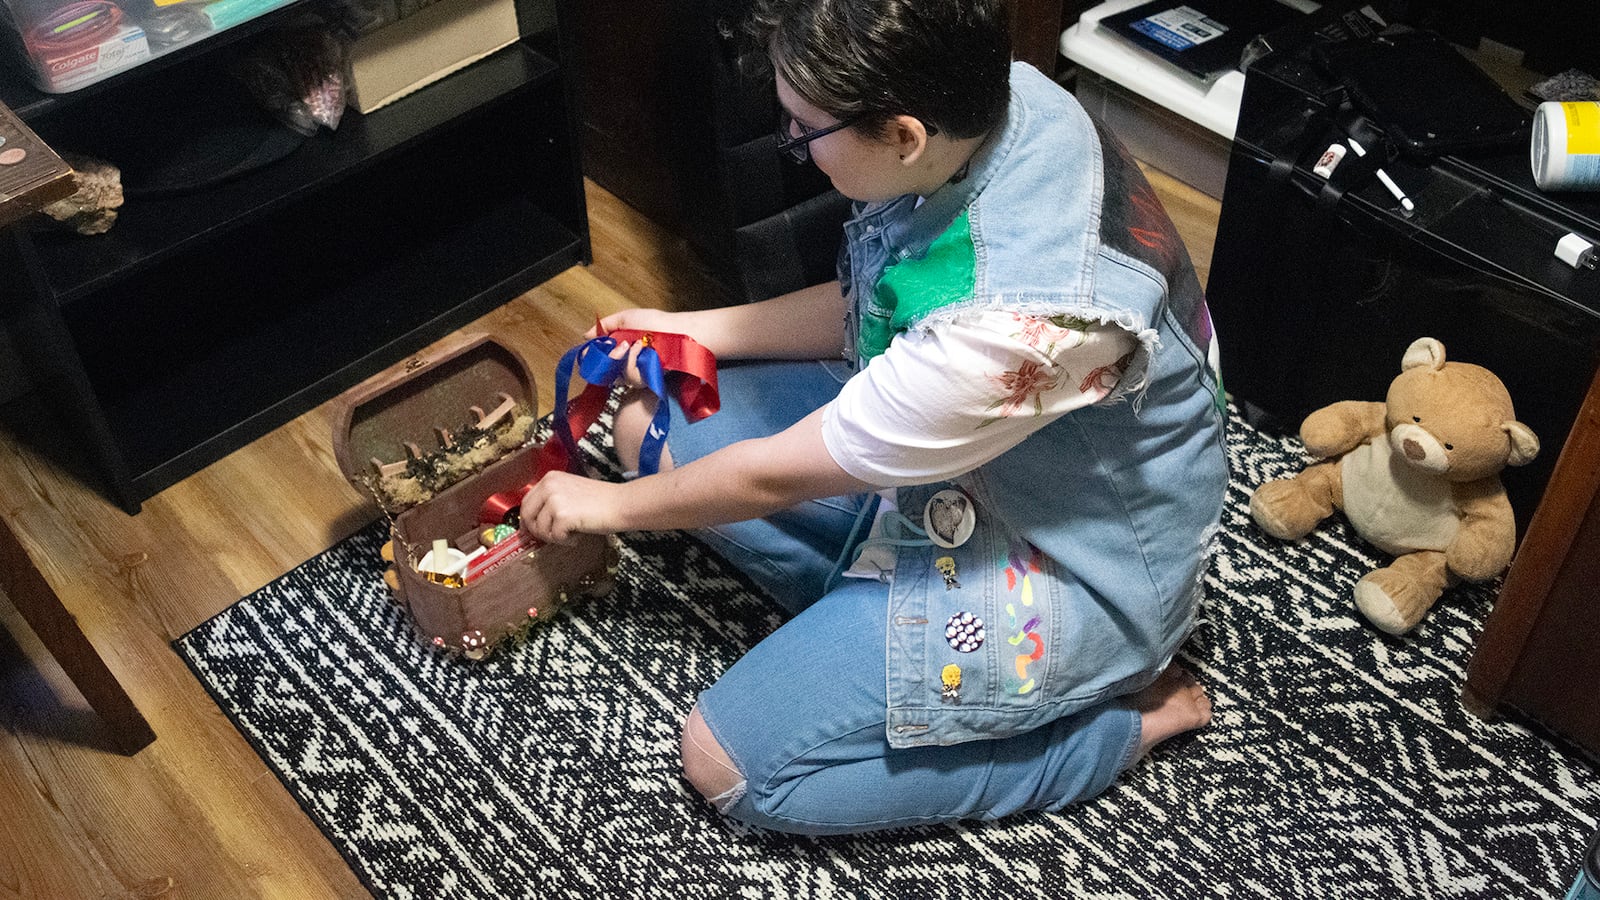 A youth in jeans and a jeans vest sits on a floor